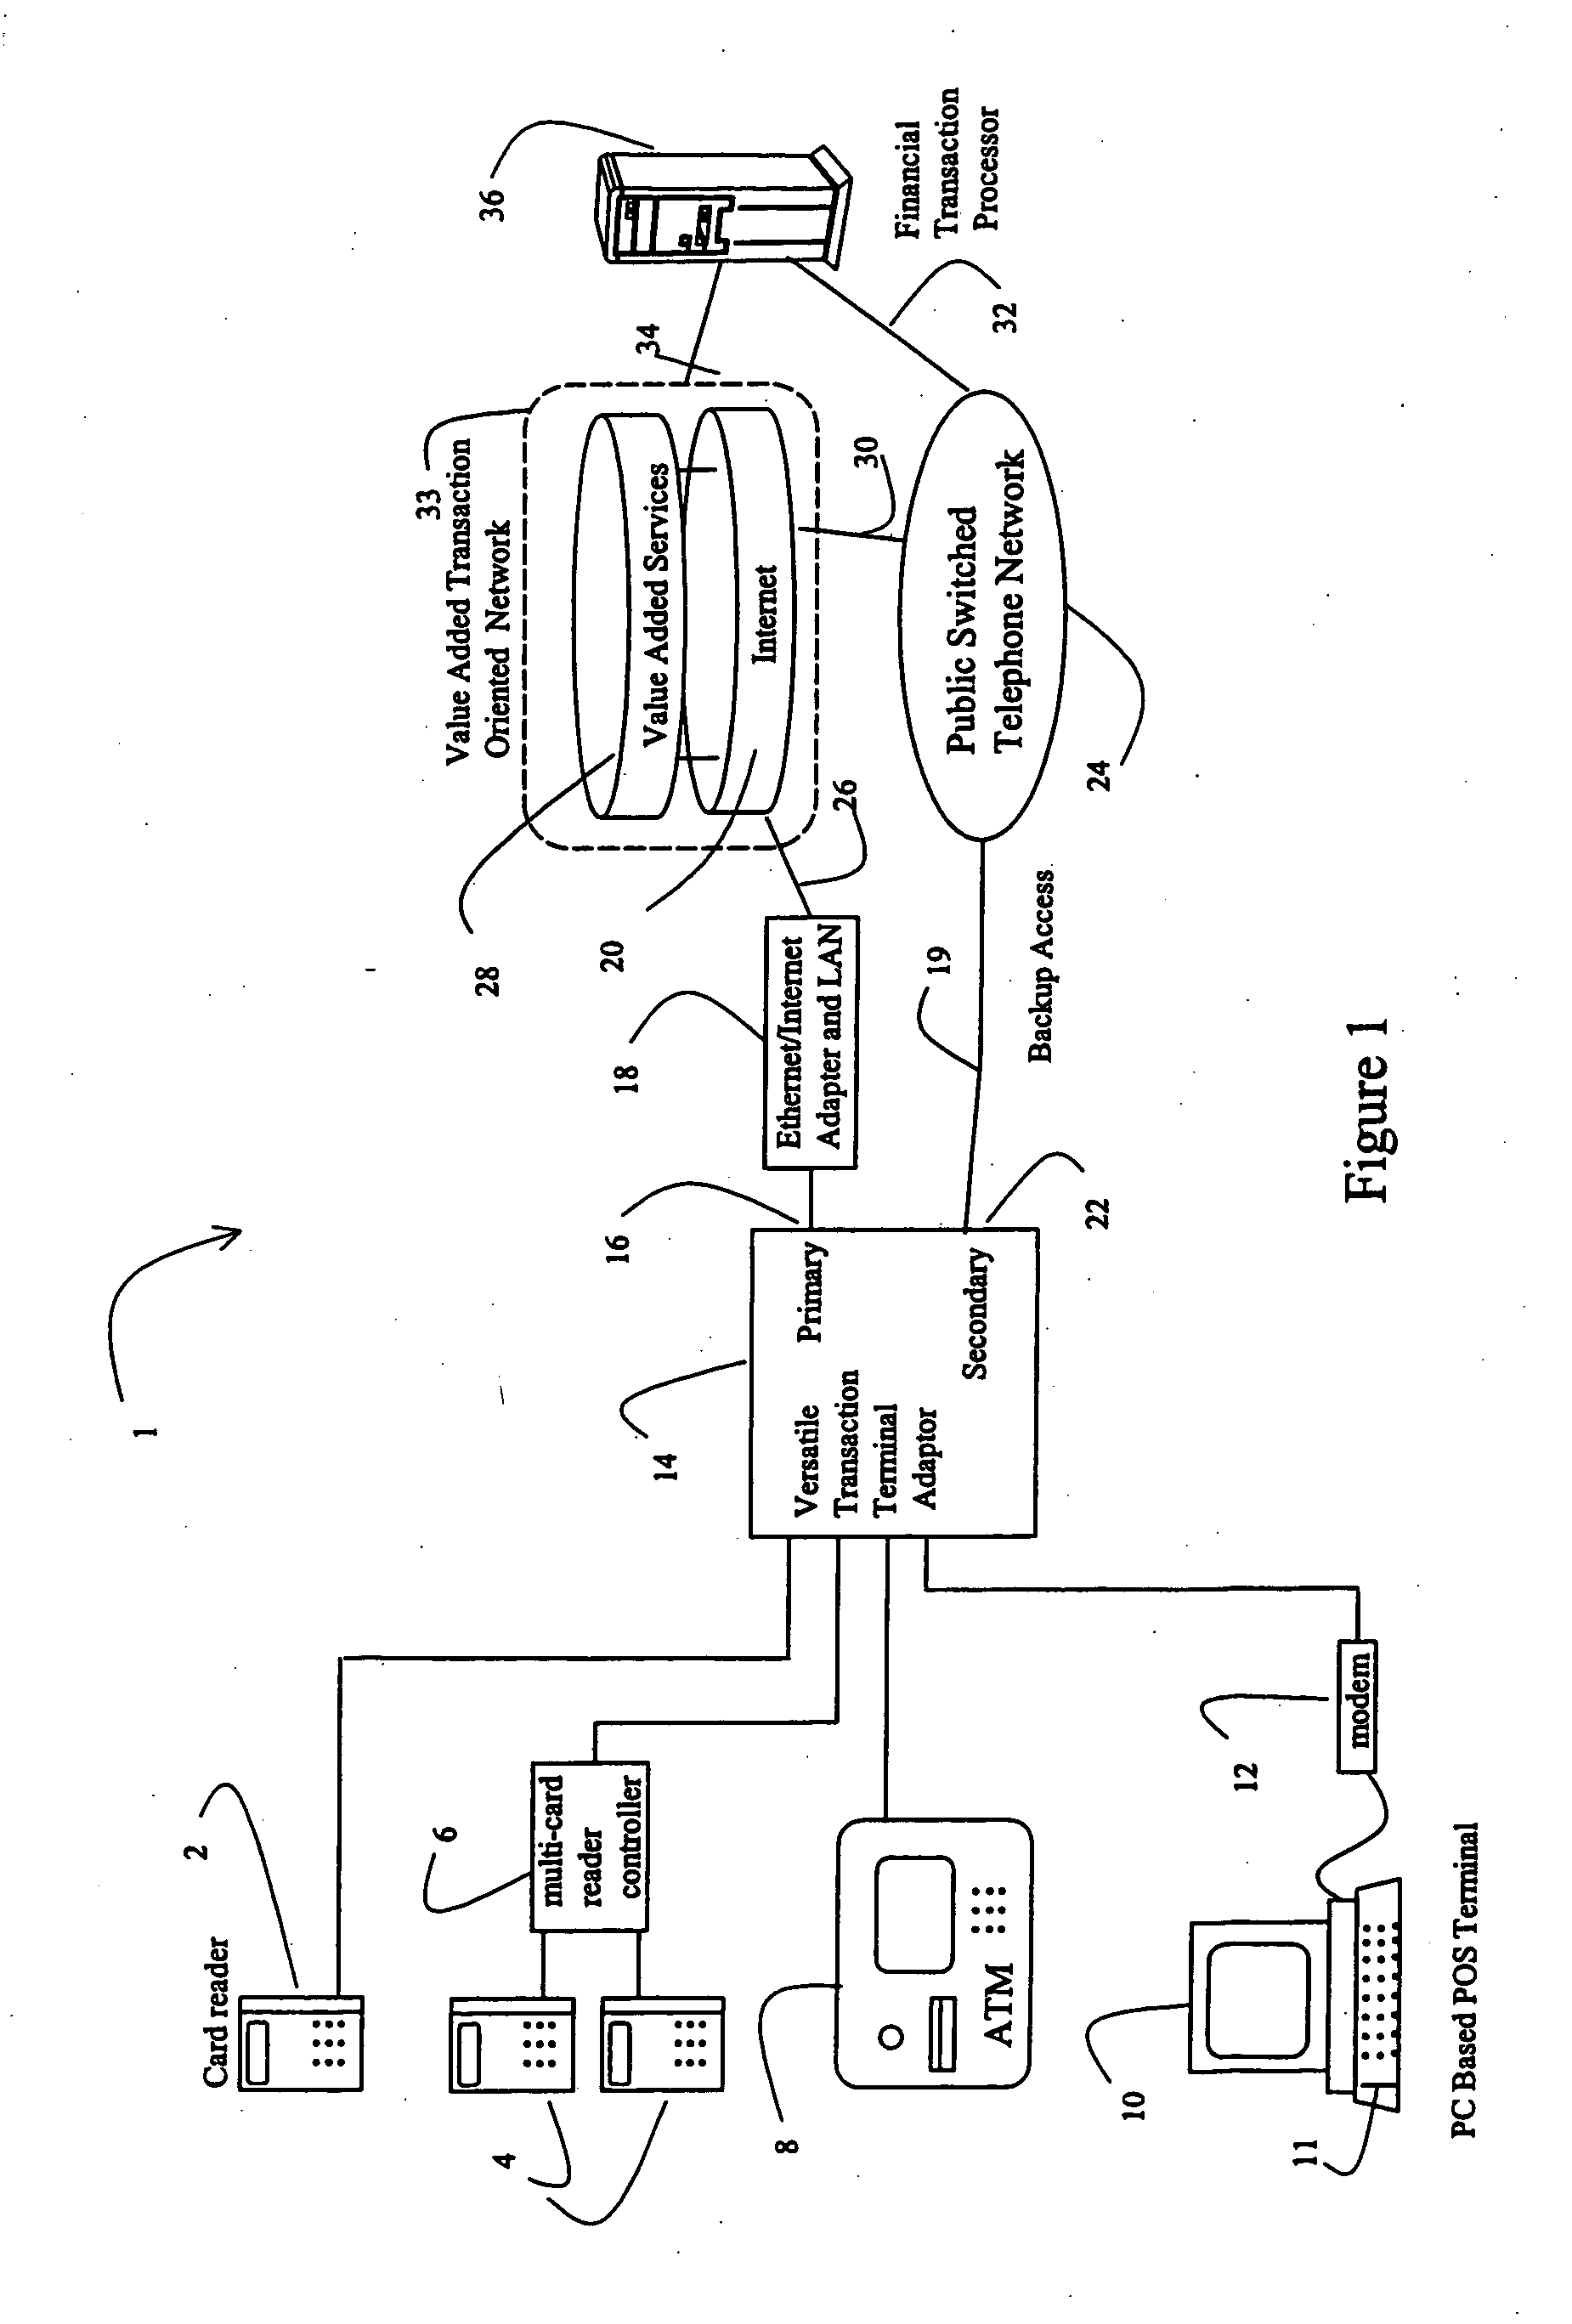 Versatile network operations center and network for transaction processing